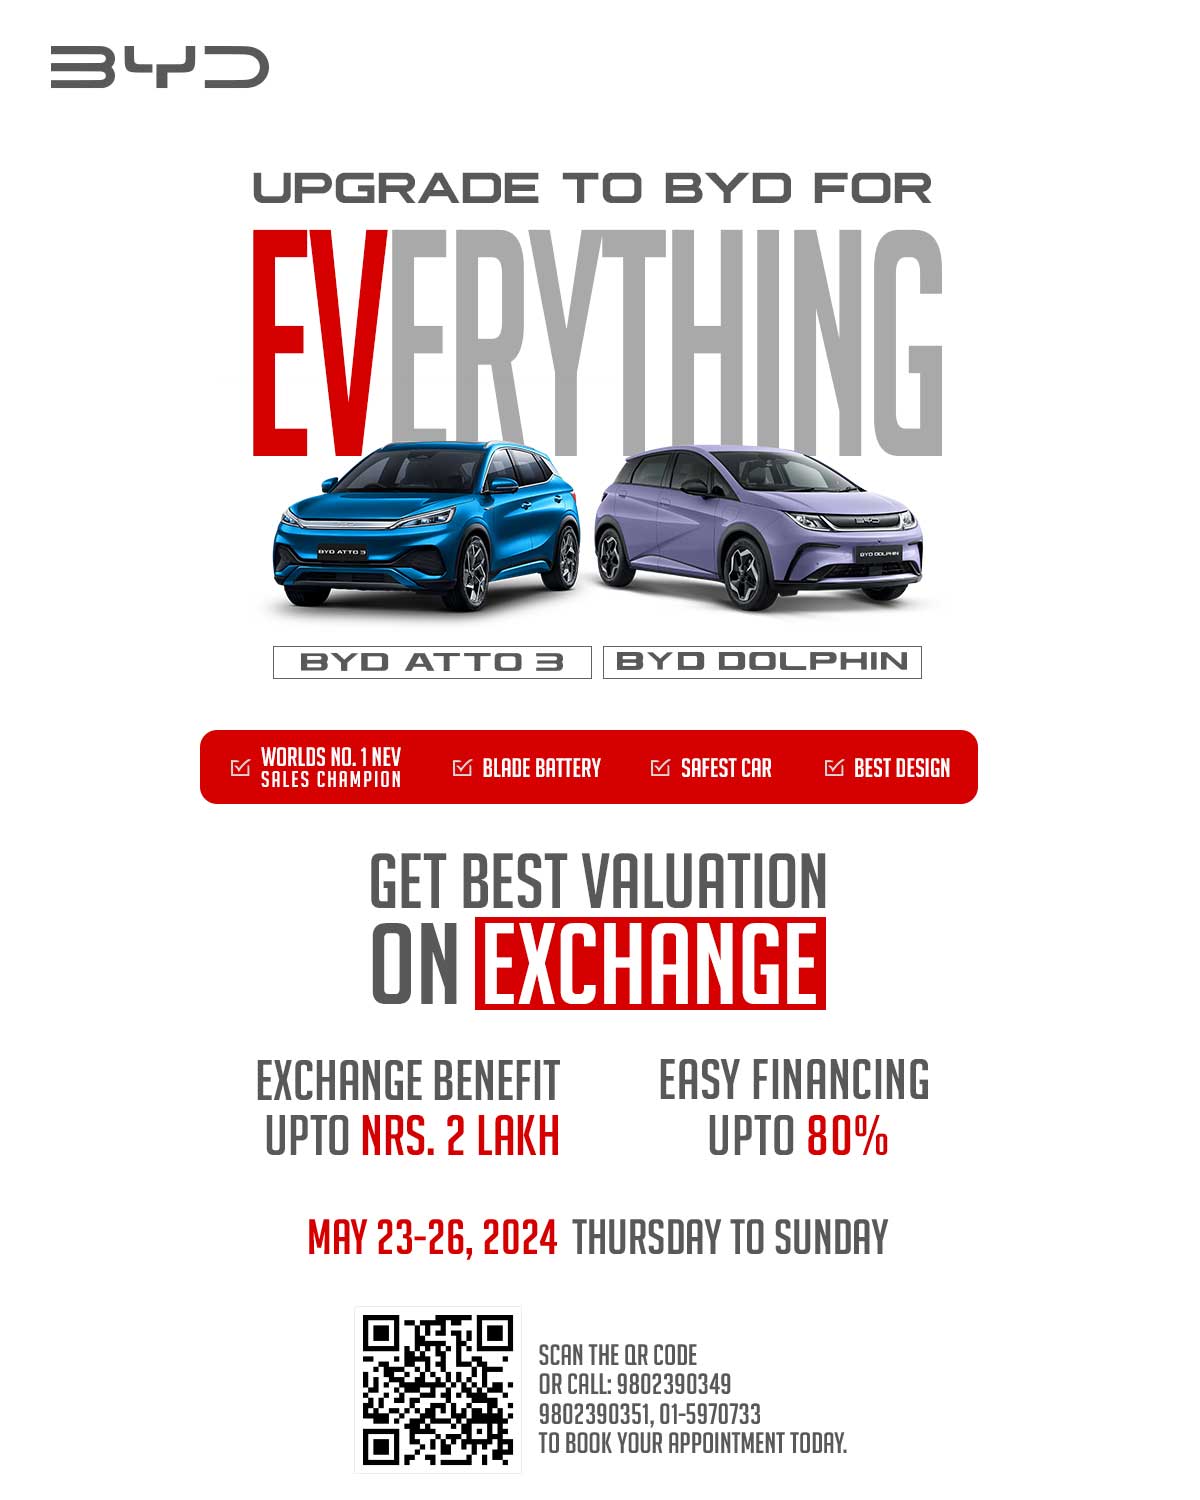 BYD announces “Upgrade to BYD” campaign with exciting benefits